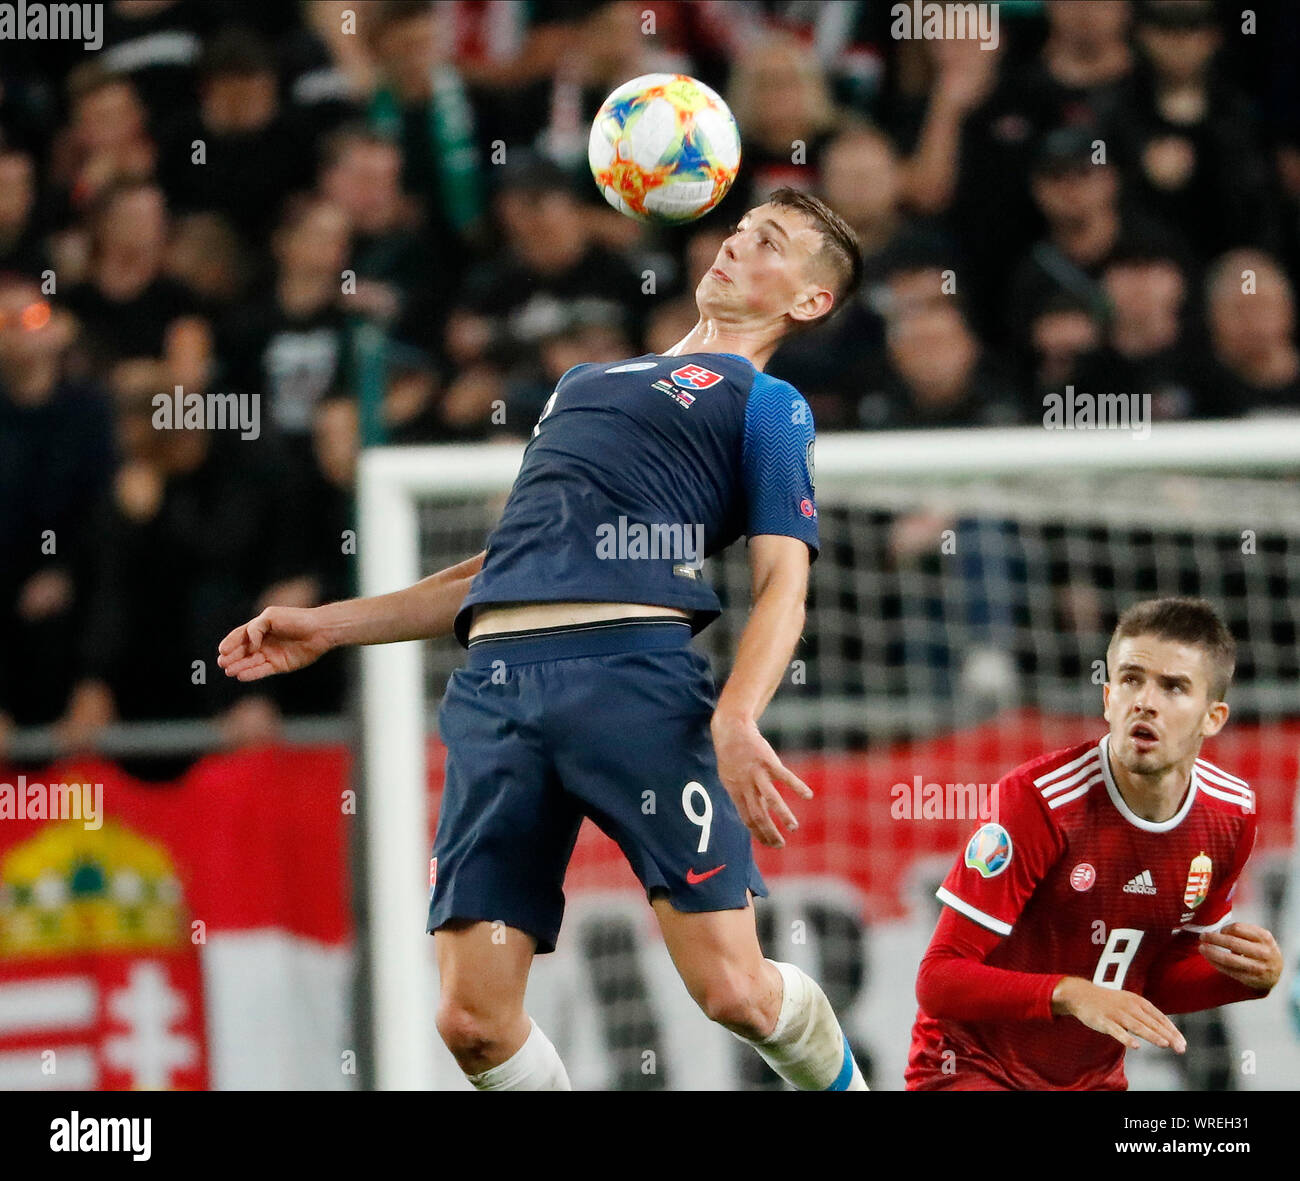 BUDAPEST, HUNGARY - SEPTEMBER 9: (l-r) Robert Bozenik of Slovakia controls the ball next to Adam Nagy of Hungary during the 2020 UEFA European Championships group E qualifying match between Hungary and Slovakia at Groupama Arena on September 9, 2019 in Budapest, Hungary. Stock Photo